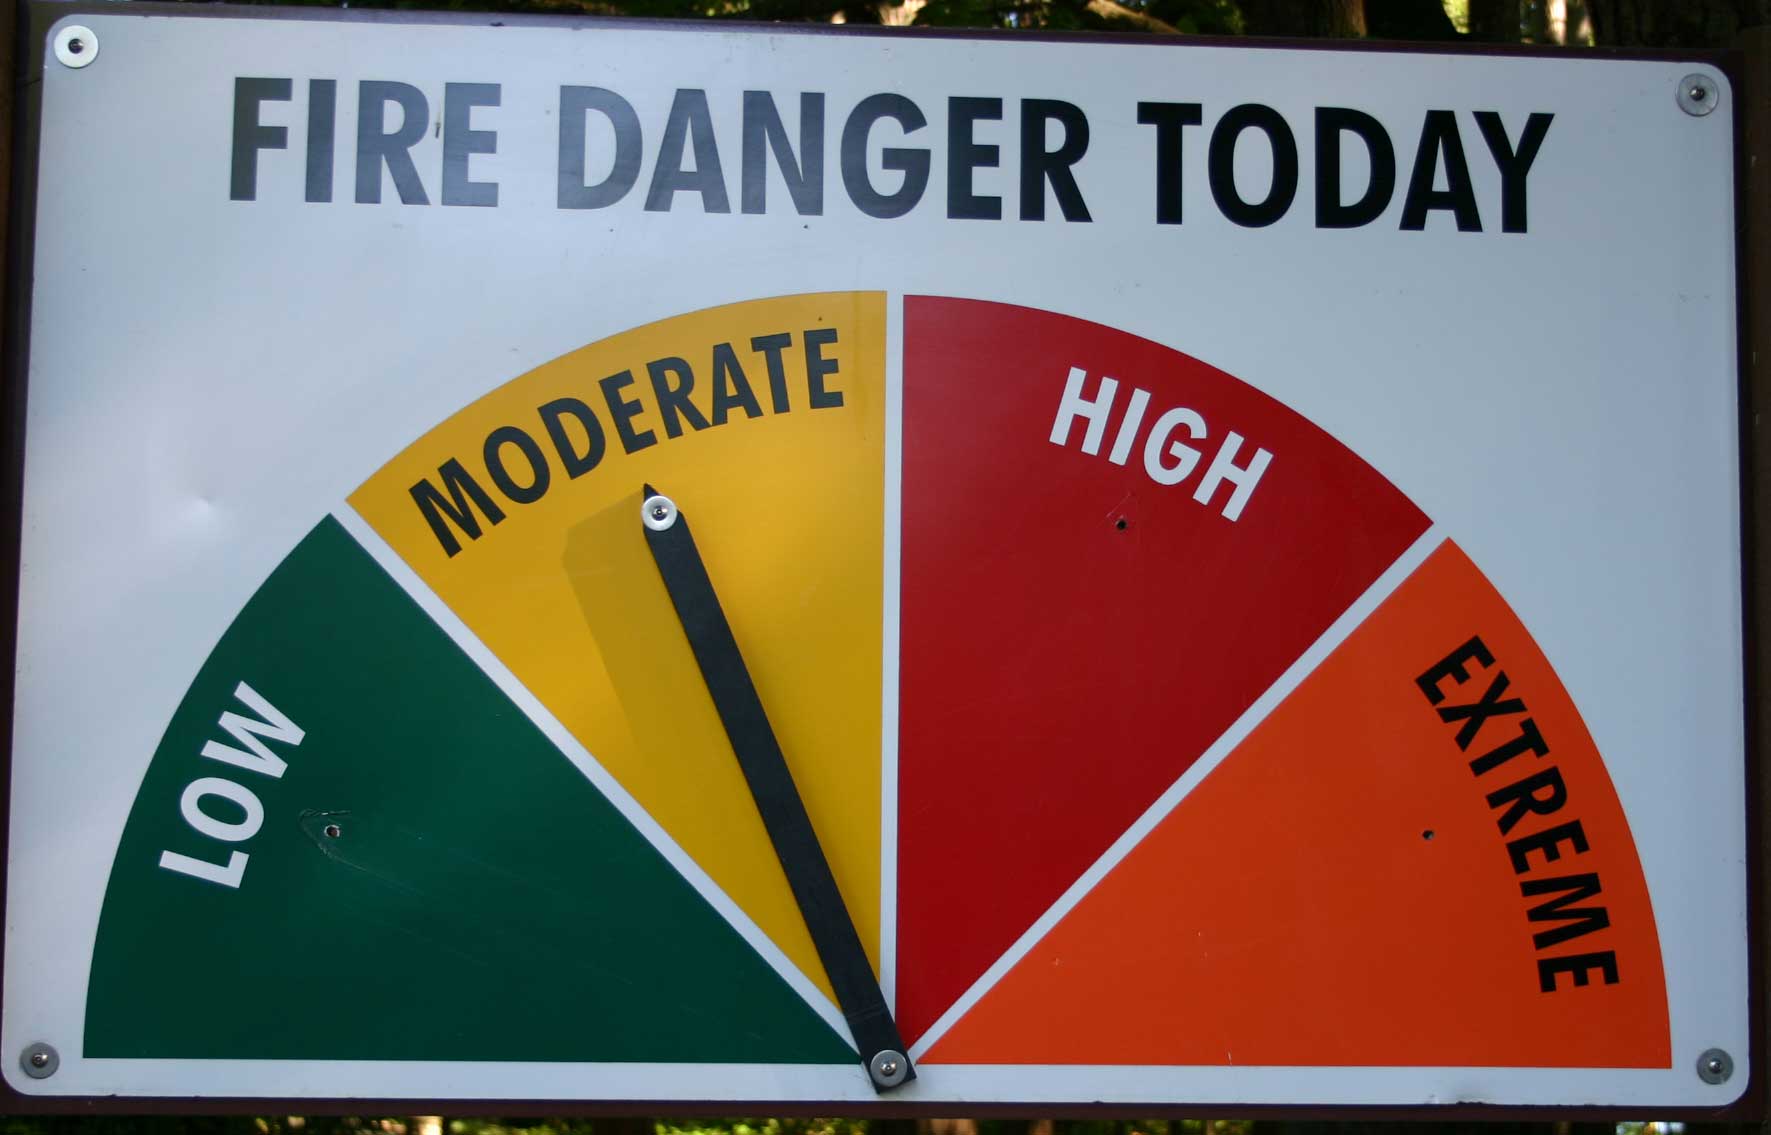 Fire danger, industrial fire precaution level increases statewide